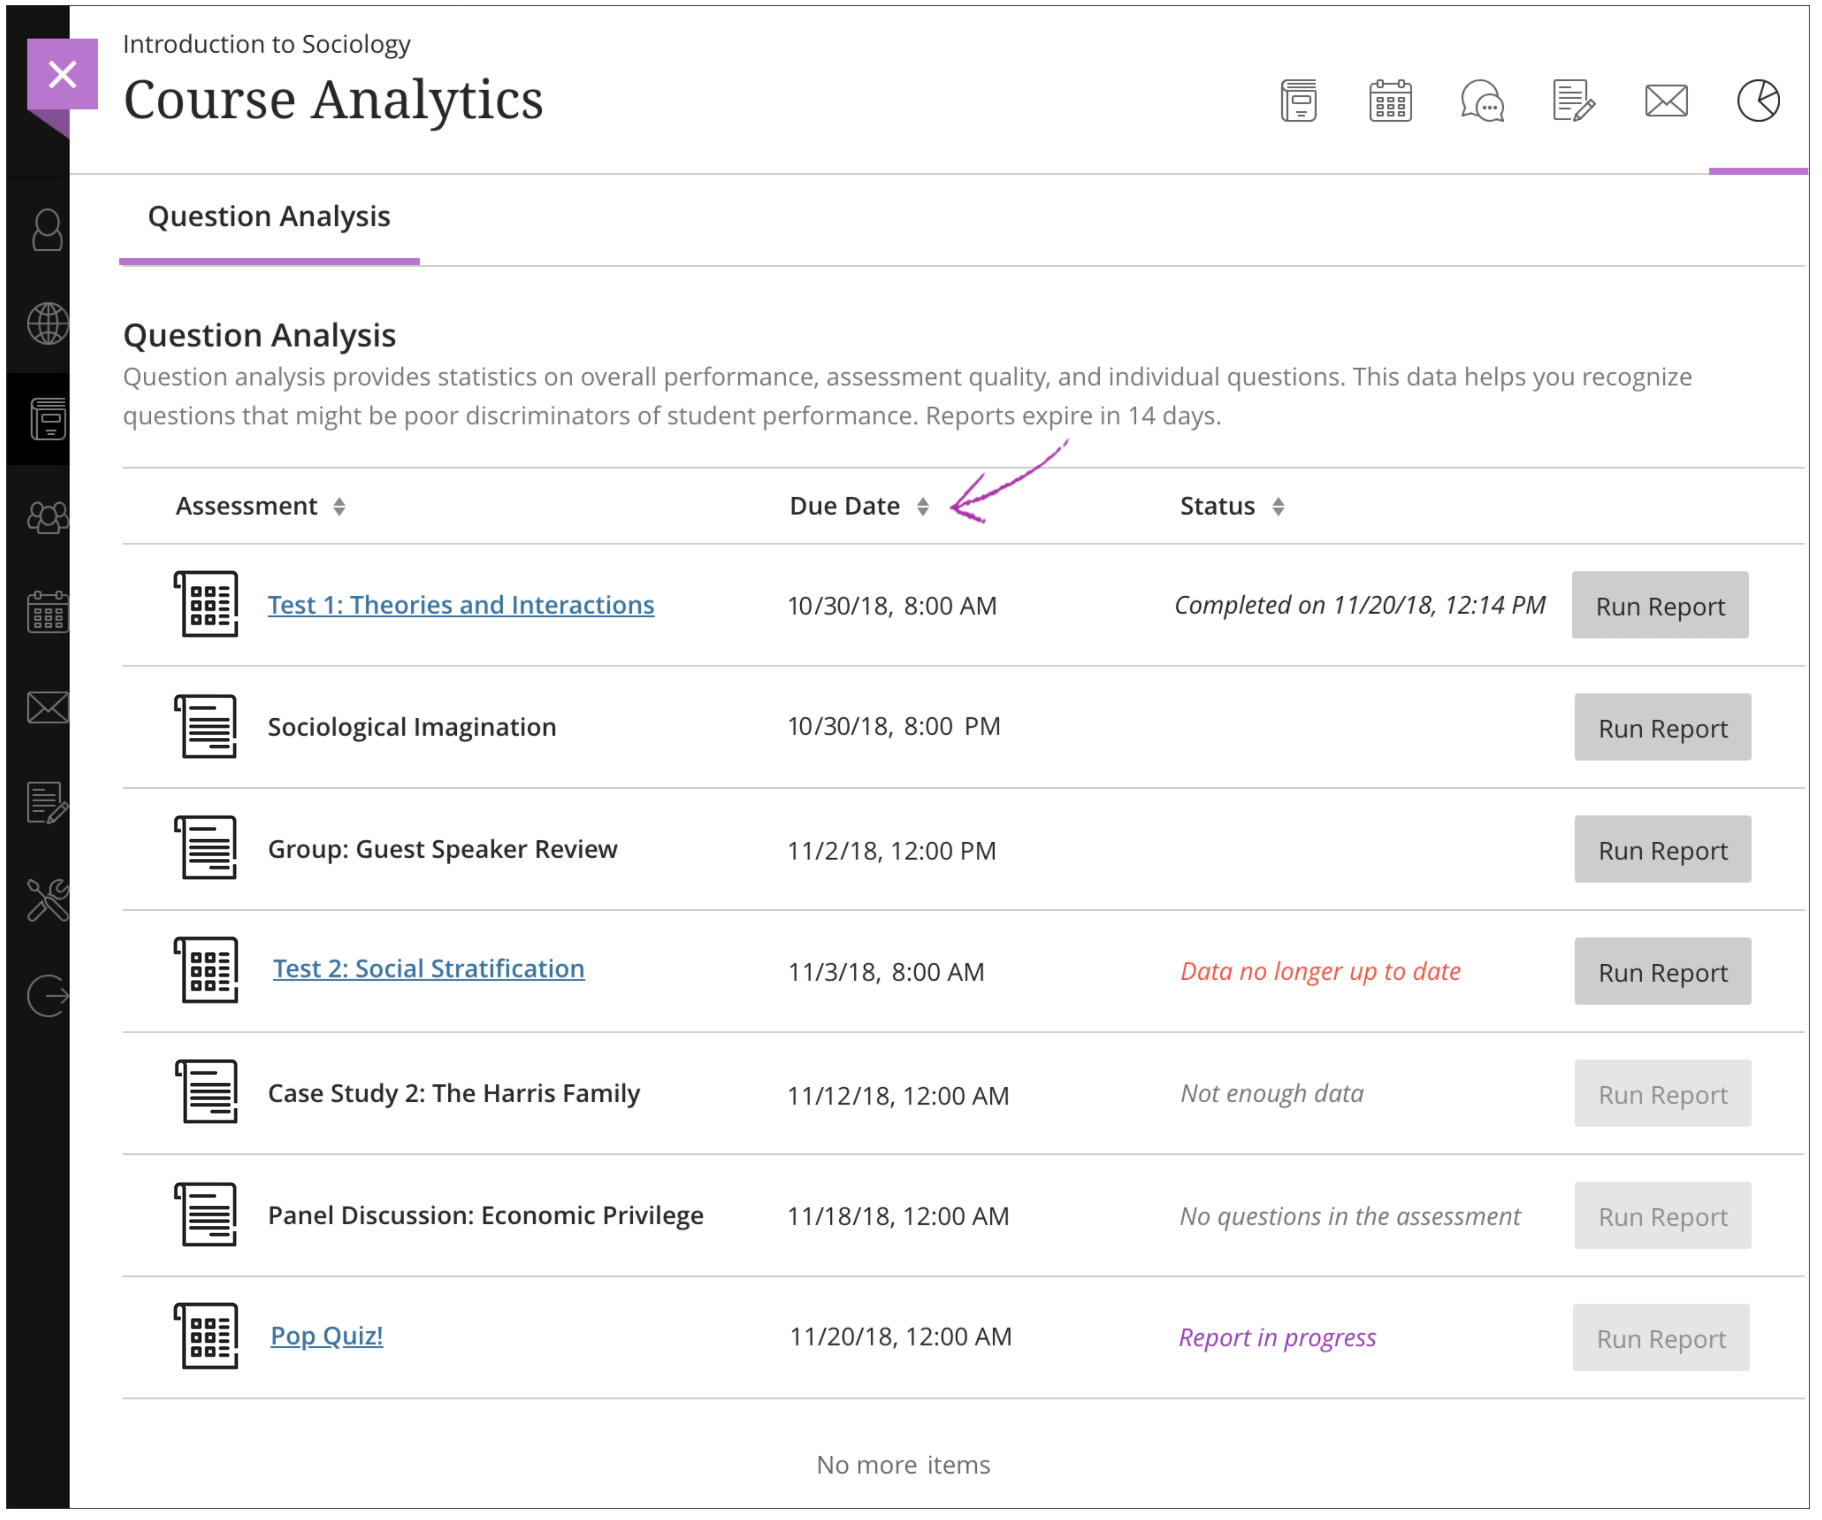 Course analytics question analysis page.